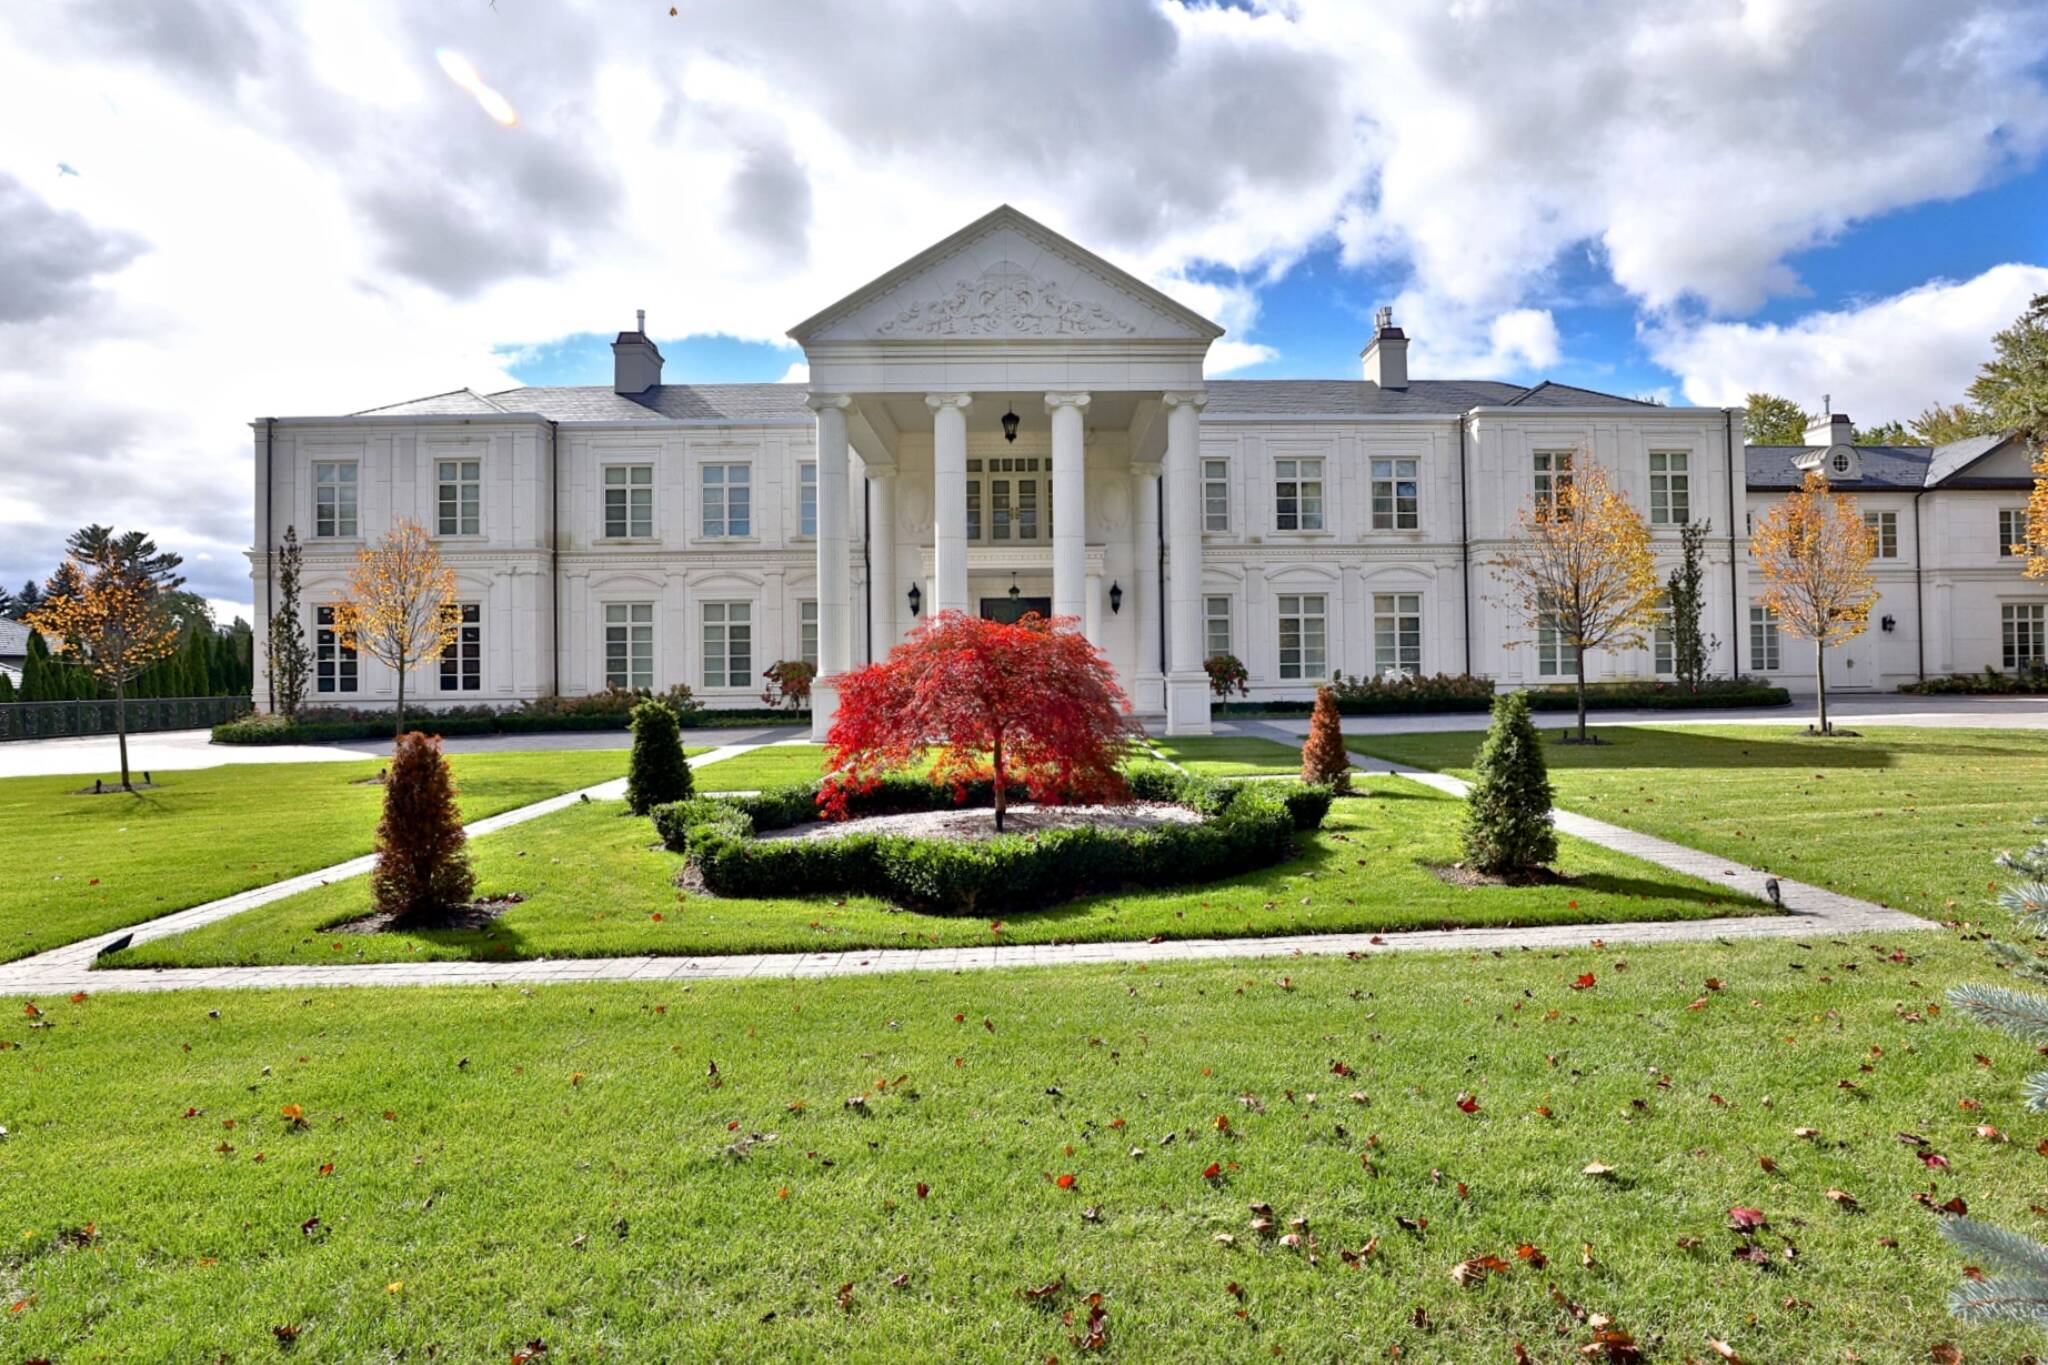 The 10 Most Expensive Homes For Sale In Toronto Right Now